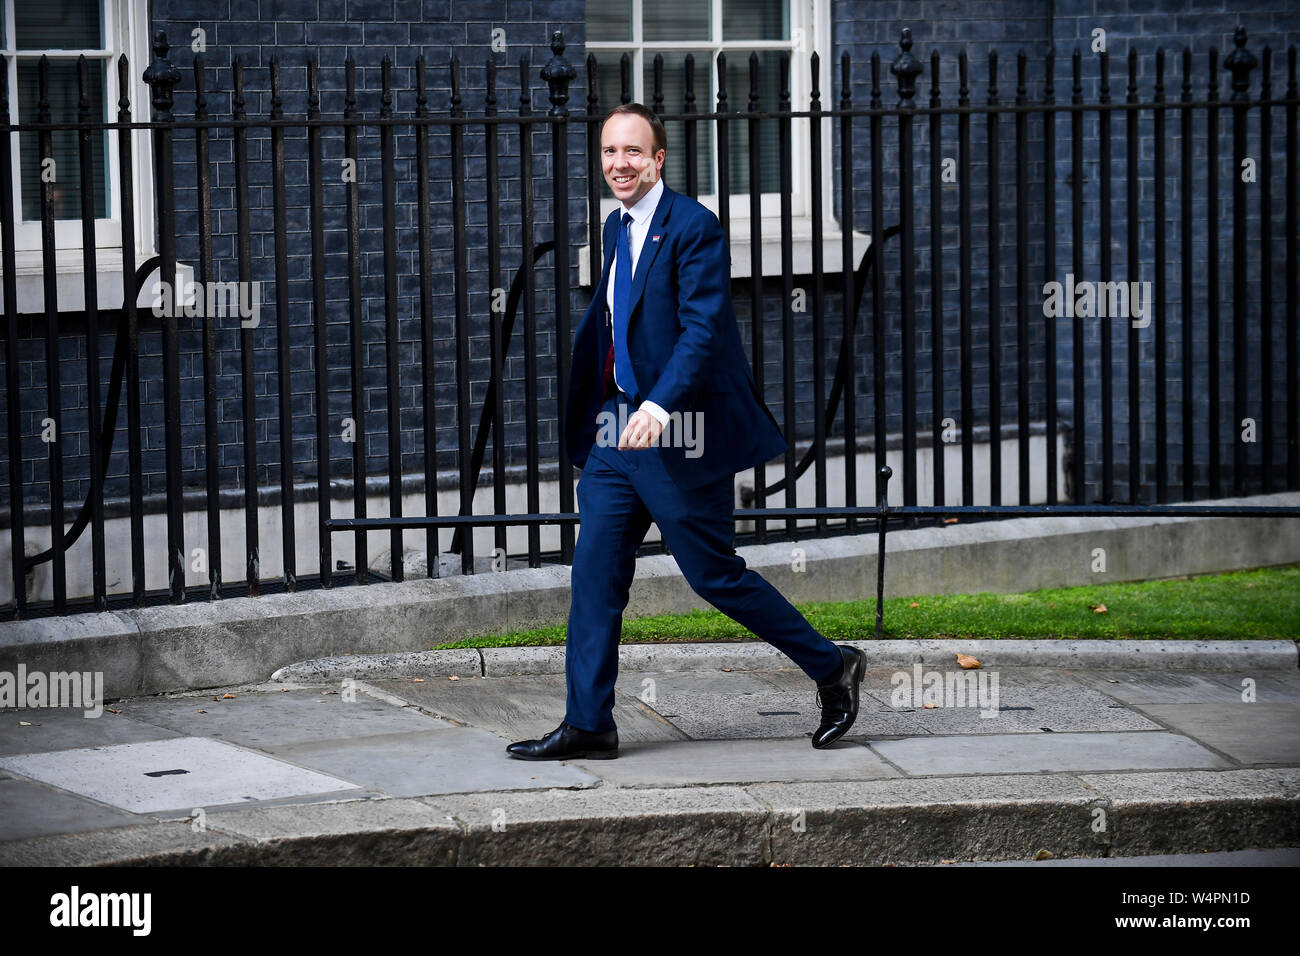 London, UK. 24th July, 2019. Britain's Health Secretary Matt Hancock arrives at 10 Downing Street, in London, Britain, on July 24, 2019. Britain's new Prime Minister Boris Johnson named the first of his new front bench ministers on Wednesday night. (Photo by Alberto Pezzali/Xinhua) Credit: Xinhua/Alamy Live News Stock Photo